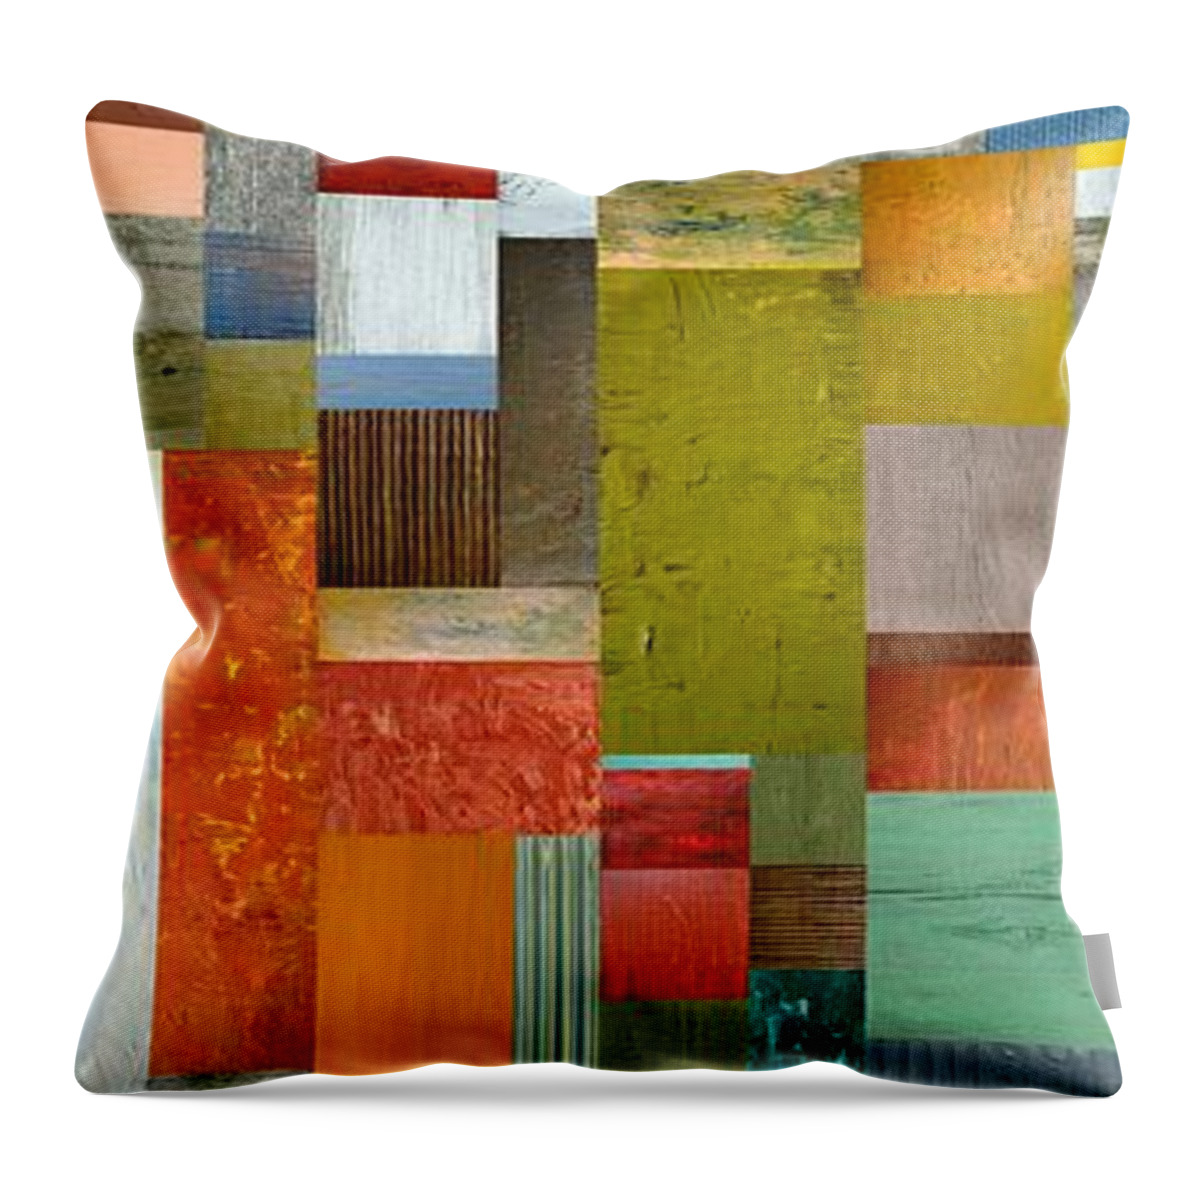 Multicolored Throw Pillow featuring the painting Pieces Parts lll by Michelle Calkins